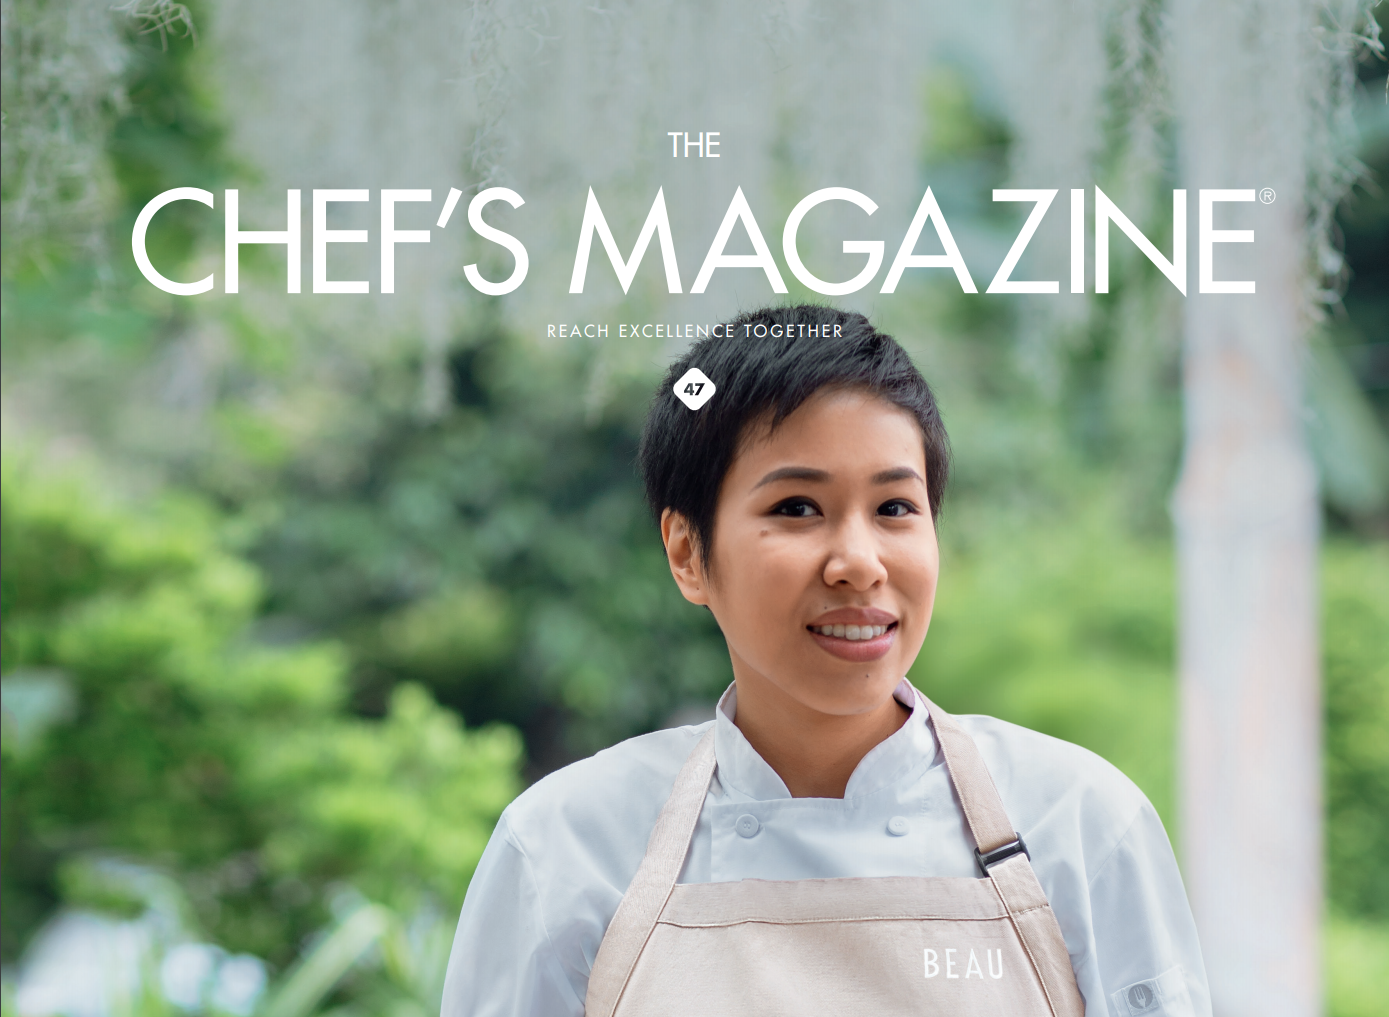 Excellence by nature: discover our new Chef’s Magazine